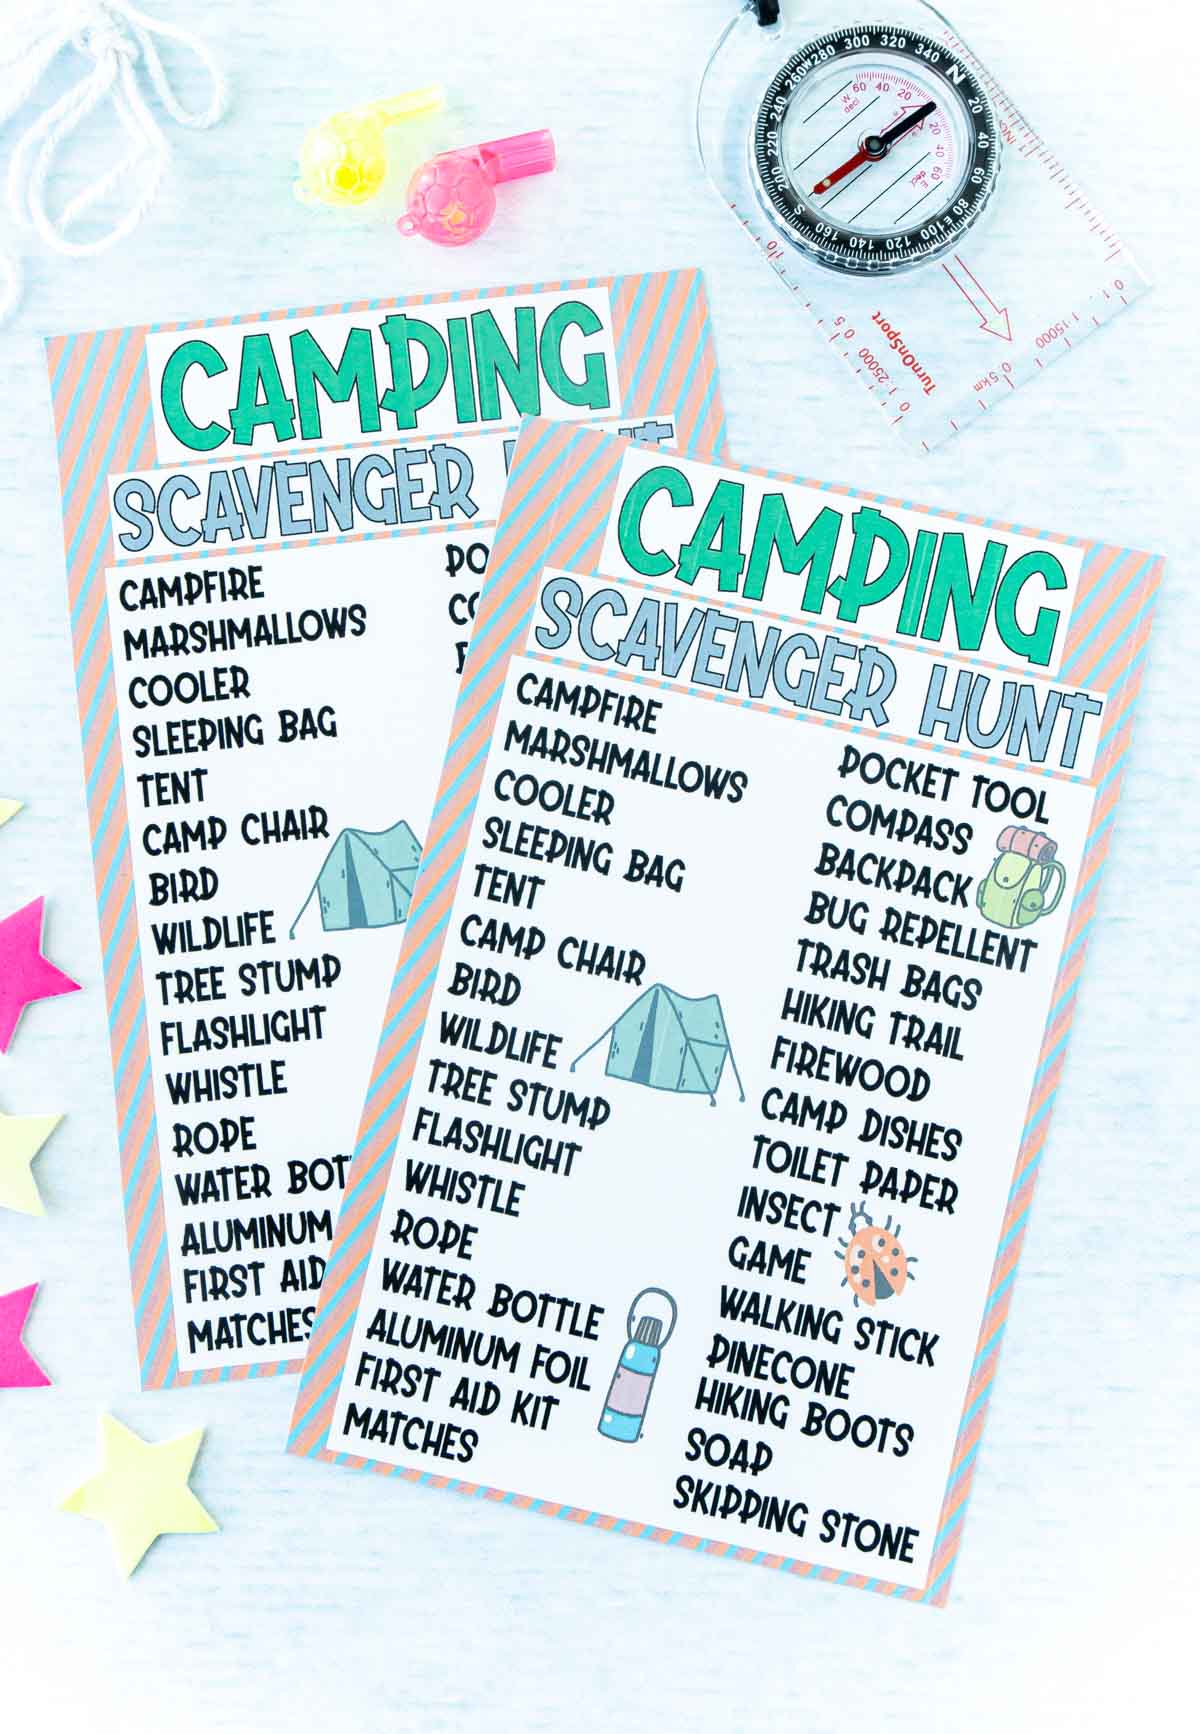 two copies of a camping scavenger hunt with a toy compass and whistle on a light blue background